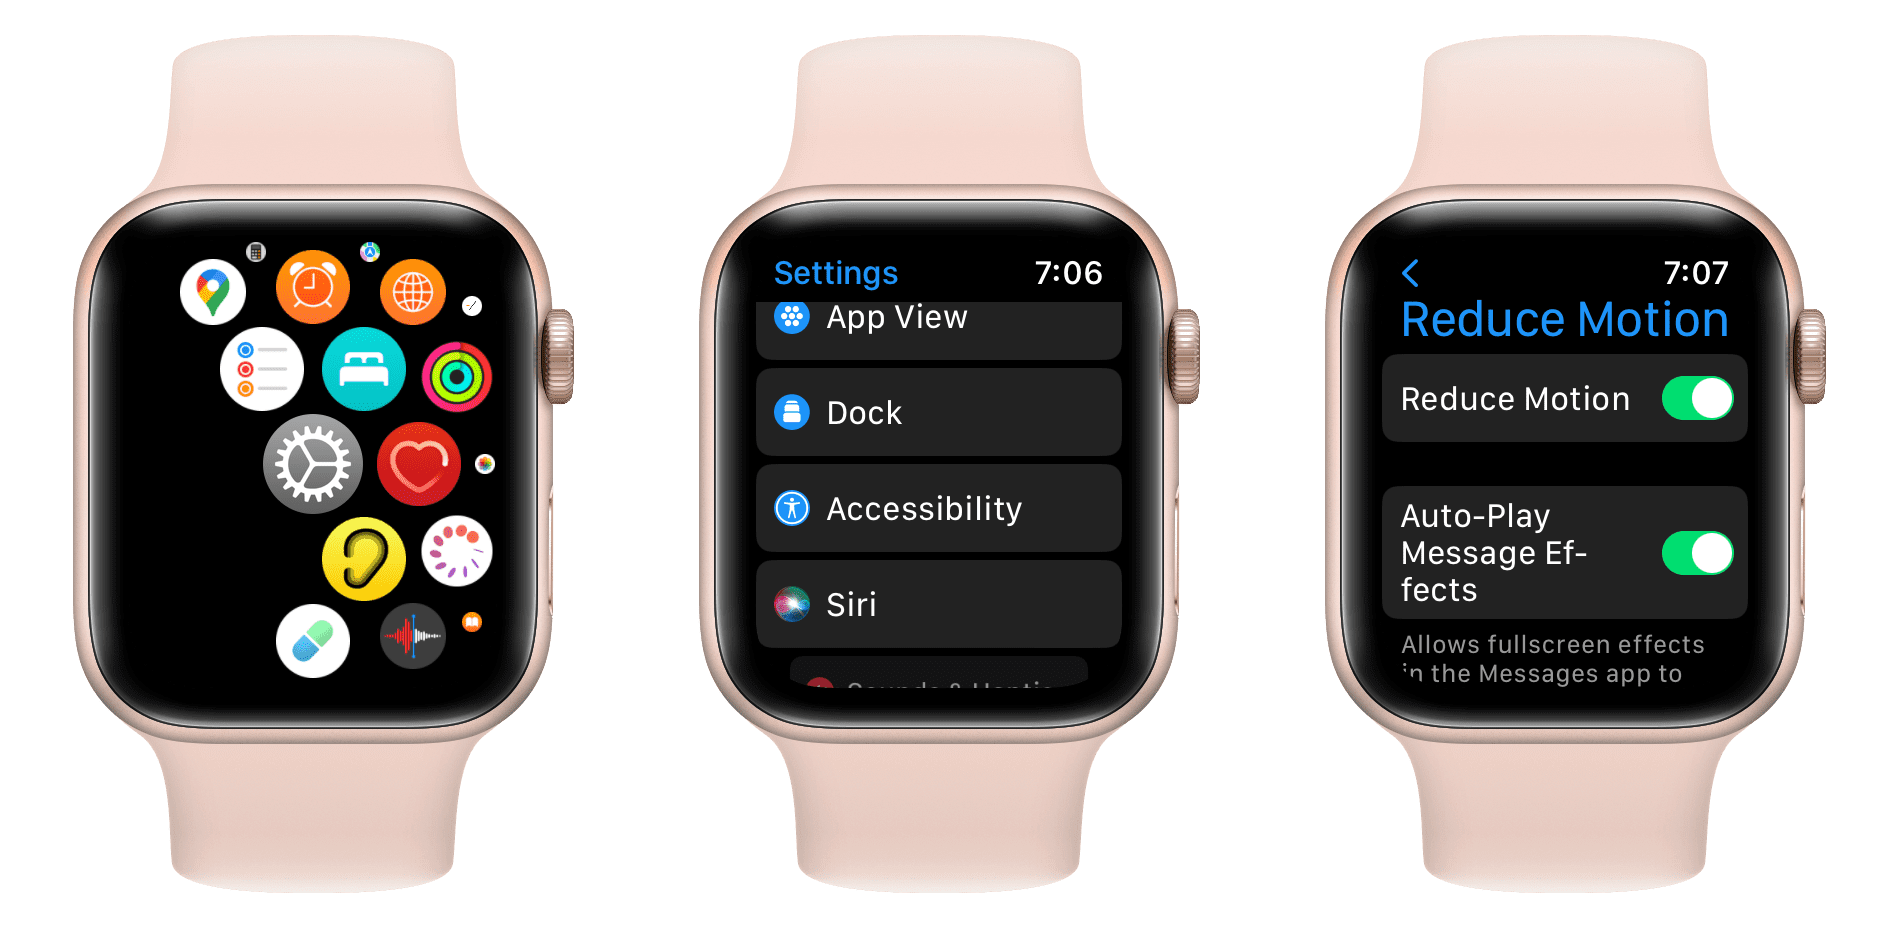 Enable Reduce Motion from Apple Watch settings